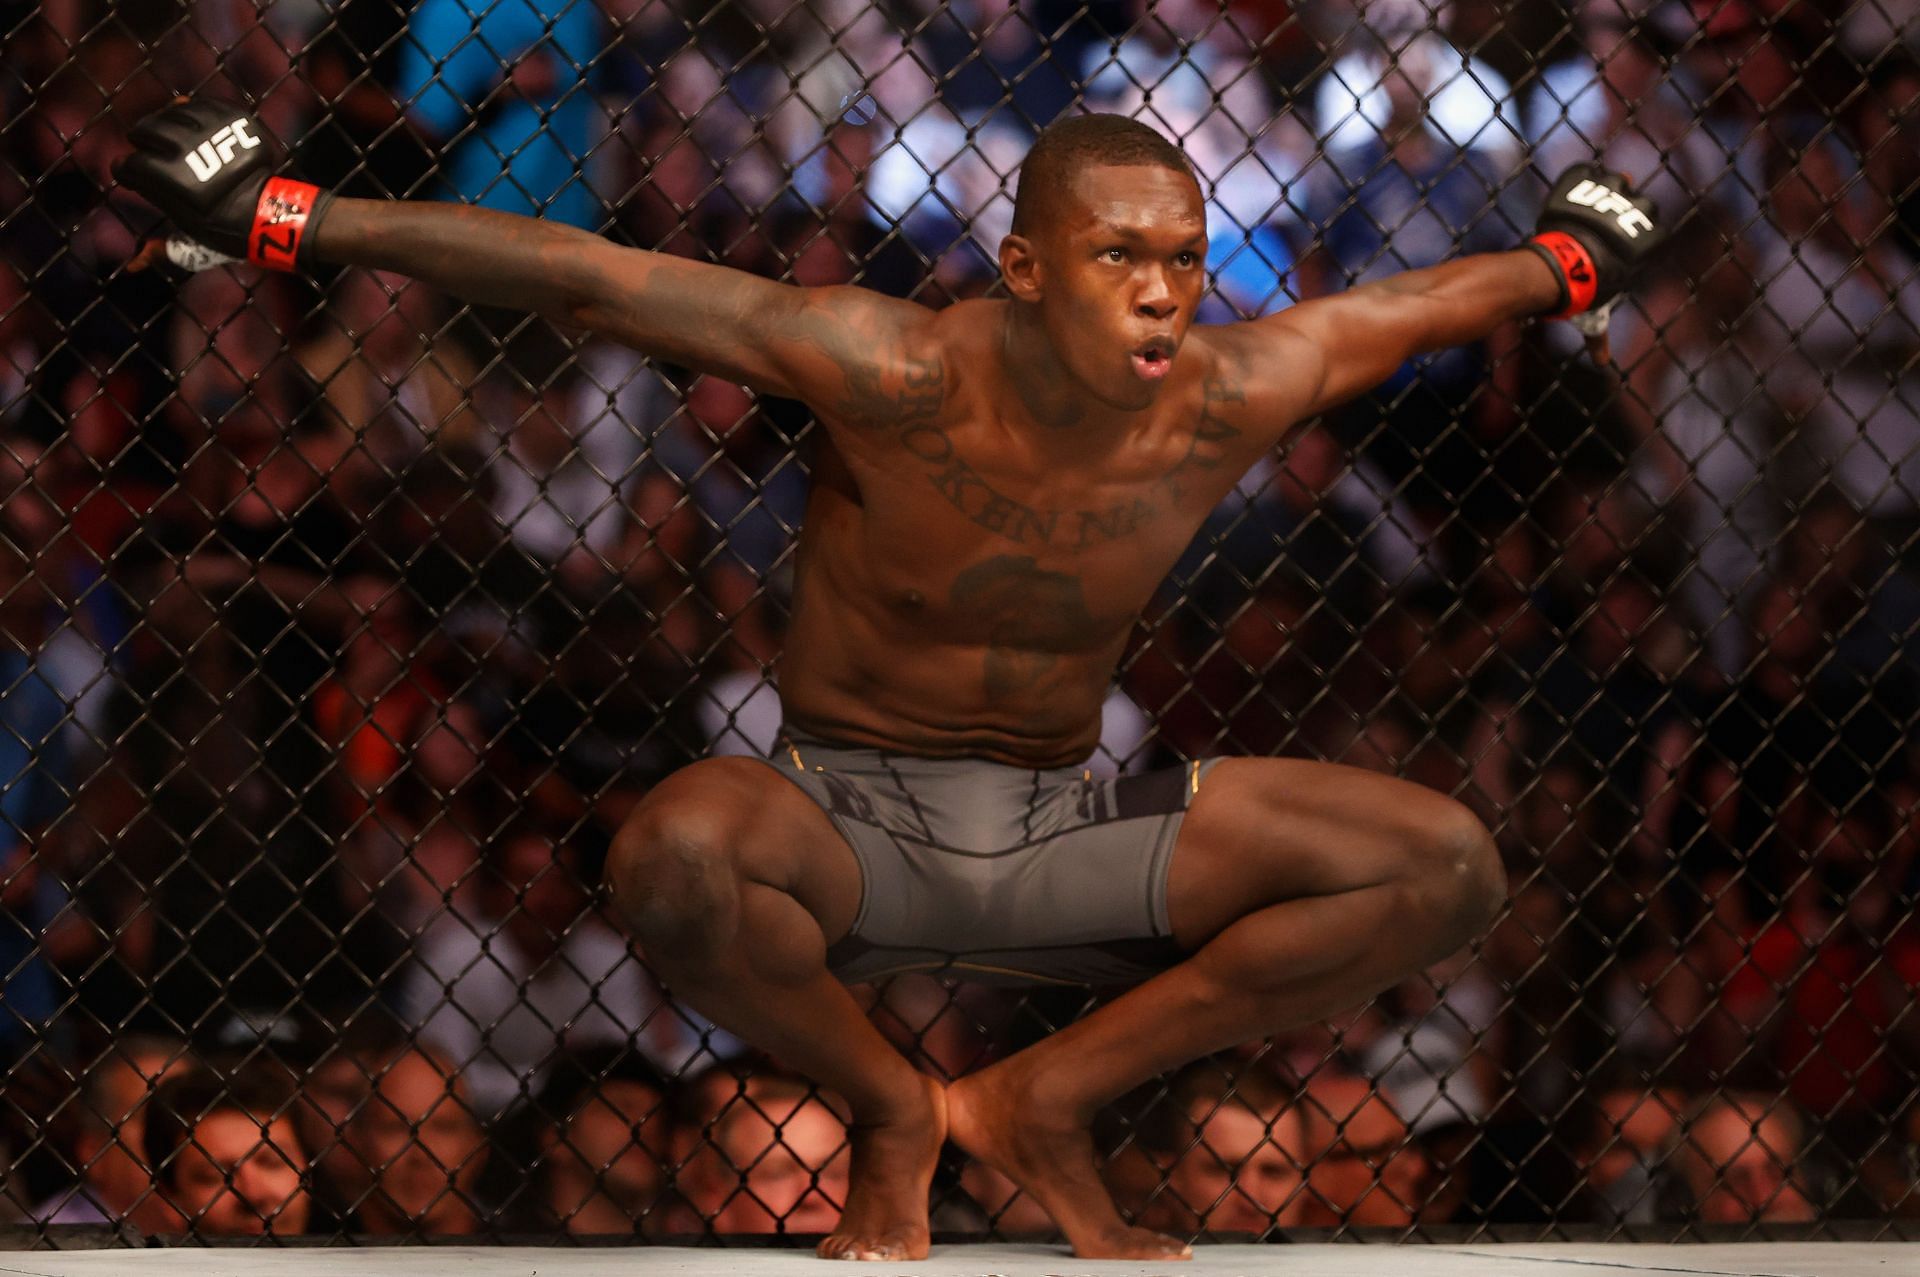 Israel Adesanya&#039;s striking skills mean he&#039;s always been compared to middleweight legend Anderson Silva